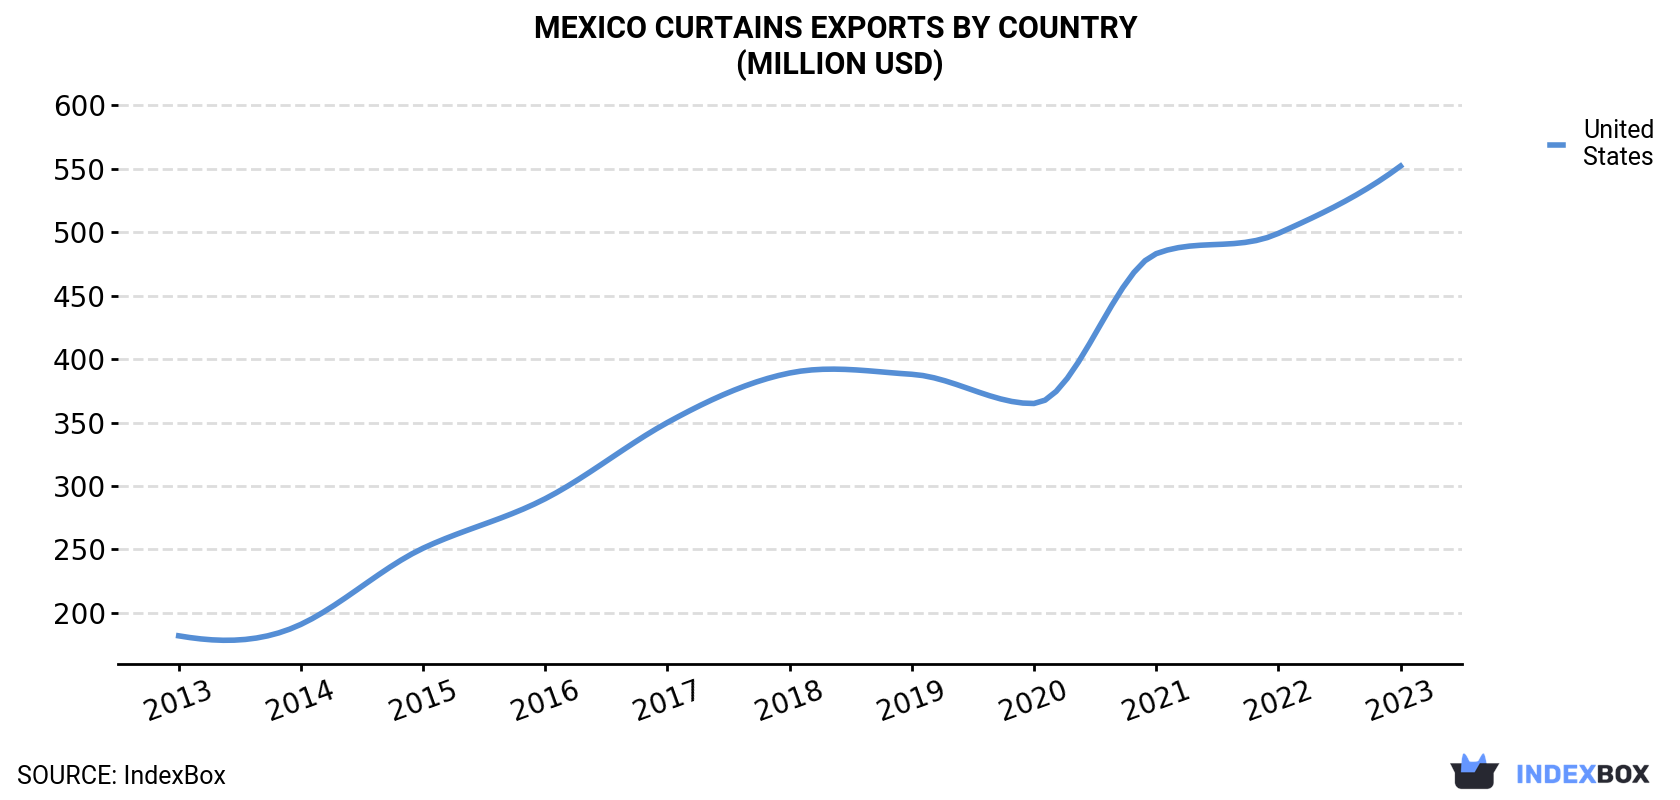 Mexico Curtains Exports By Country (Million USD)